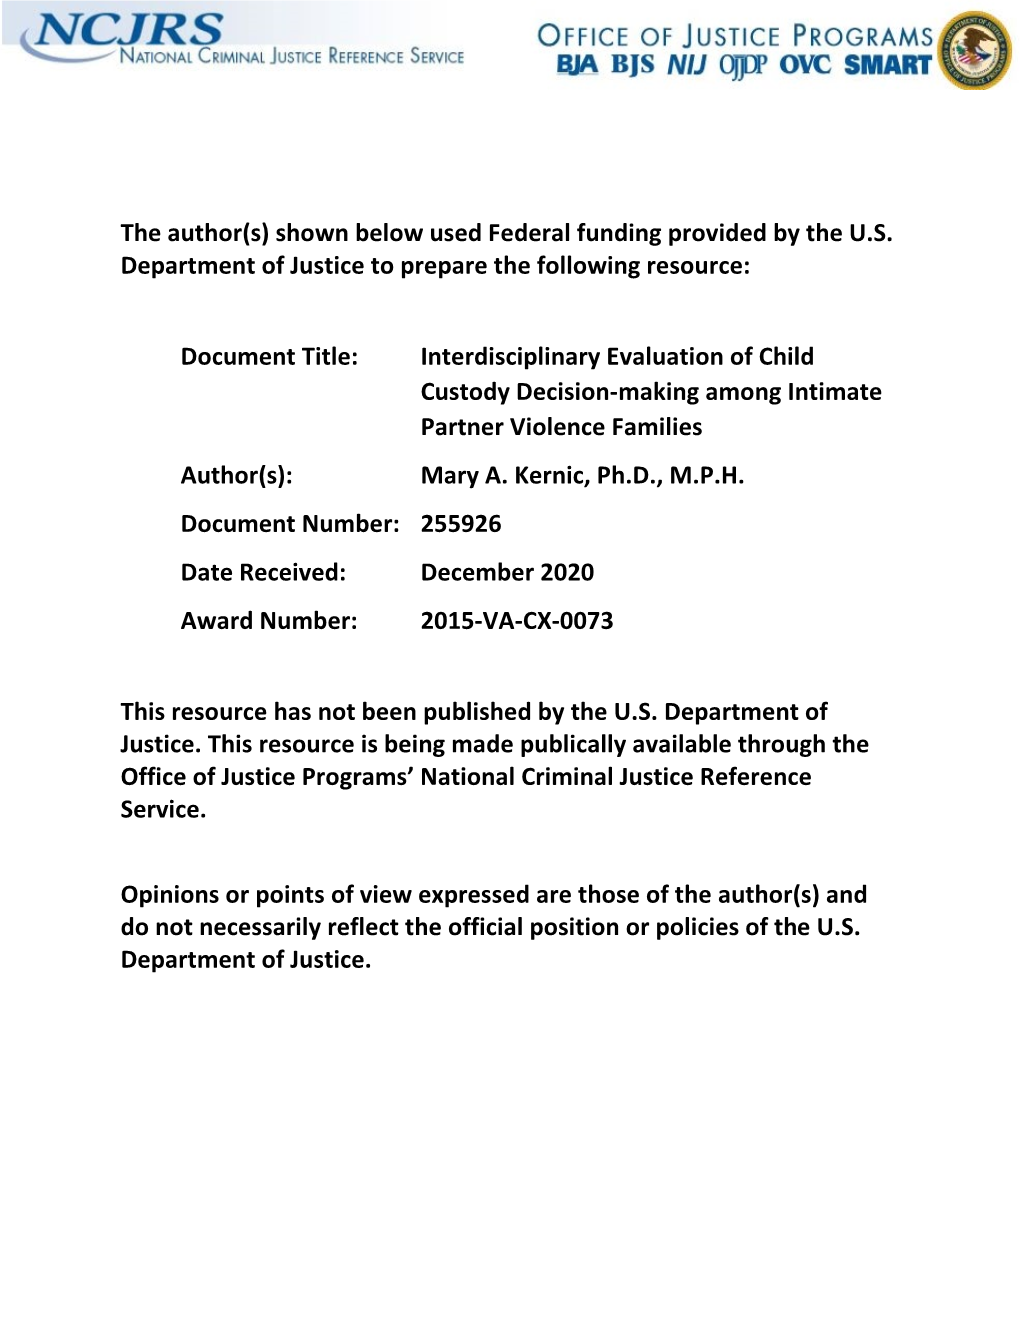 Interdisciplinary Evaluation of Child Custody Decision-Making Among Intimate Partner Violence Families Author(S): Mary A